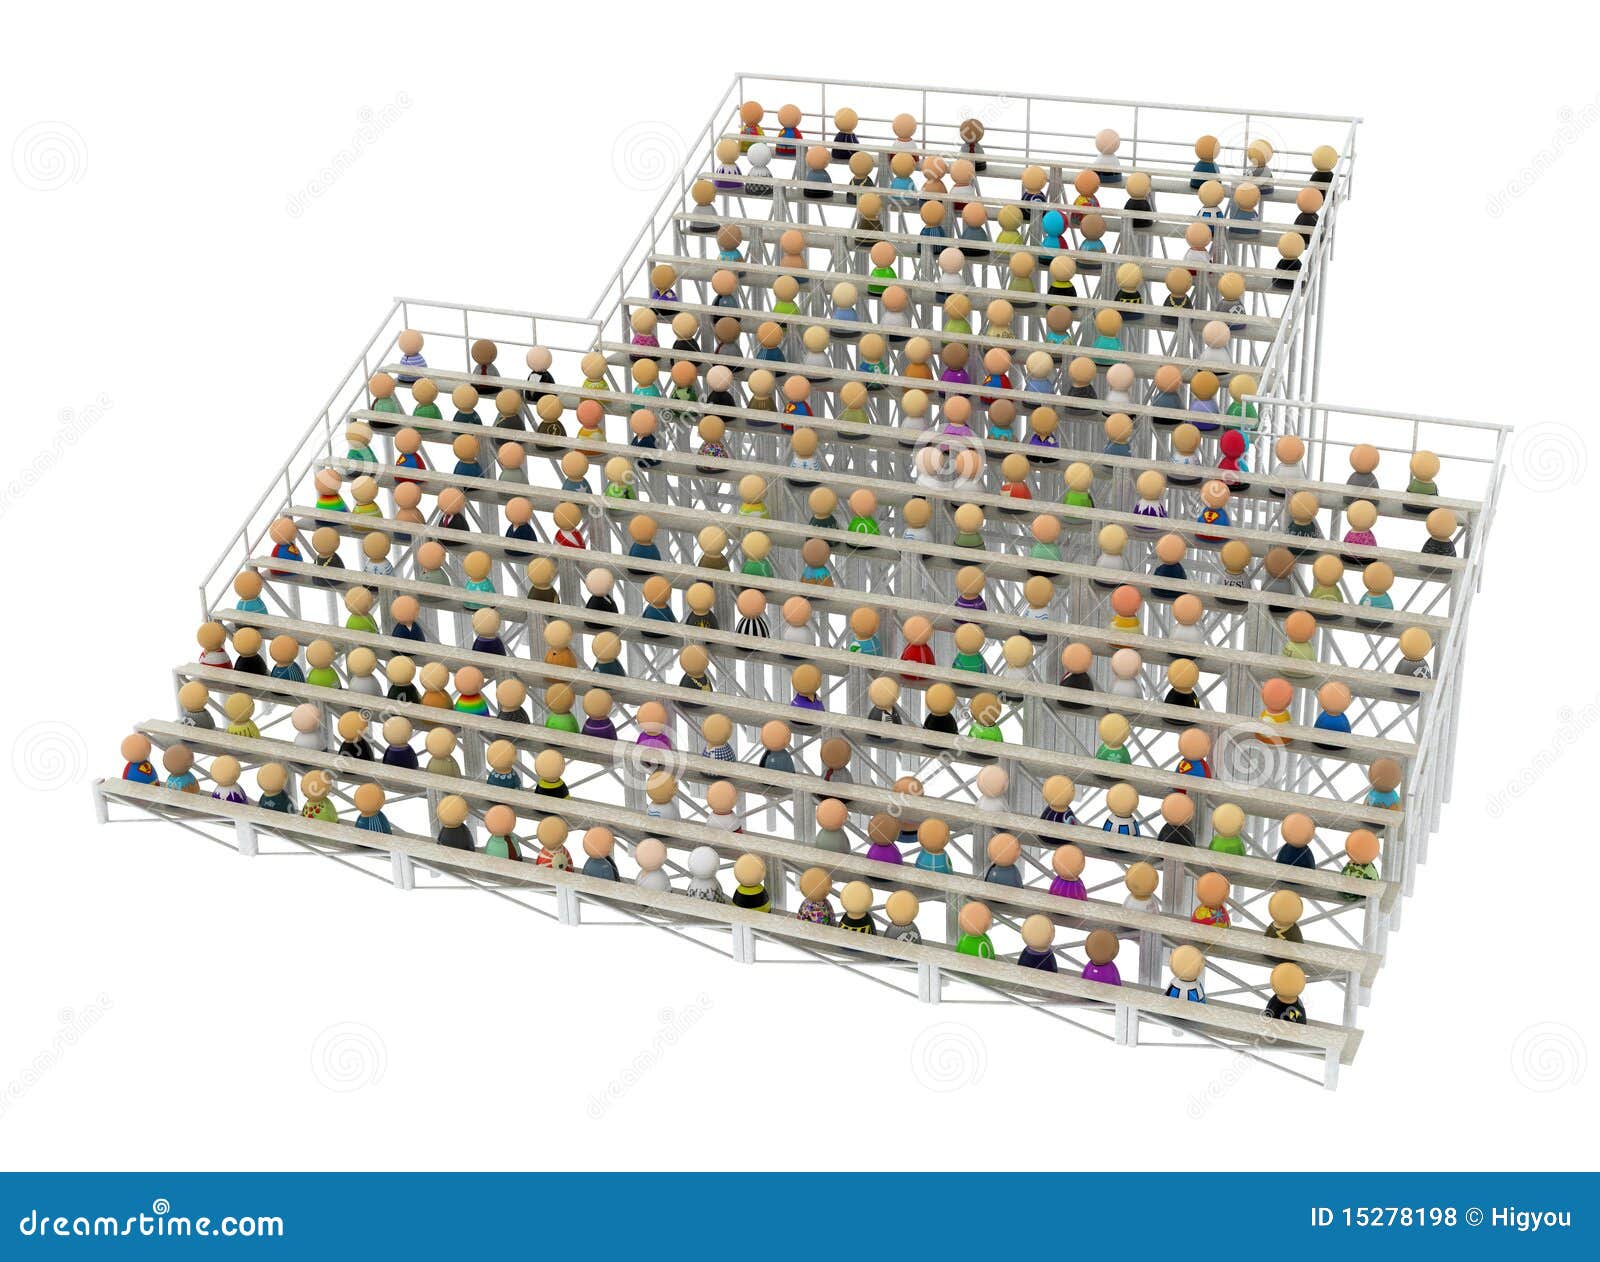 Cartoon Crowd, Bleachers stock illustration. Image of benches - 15278198